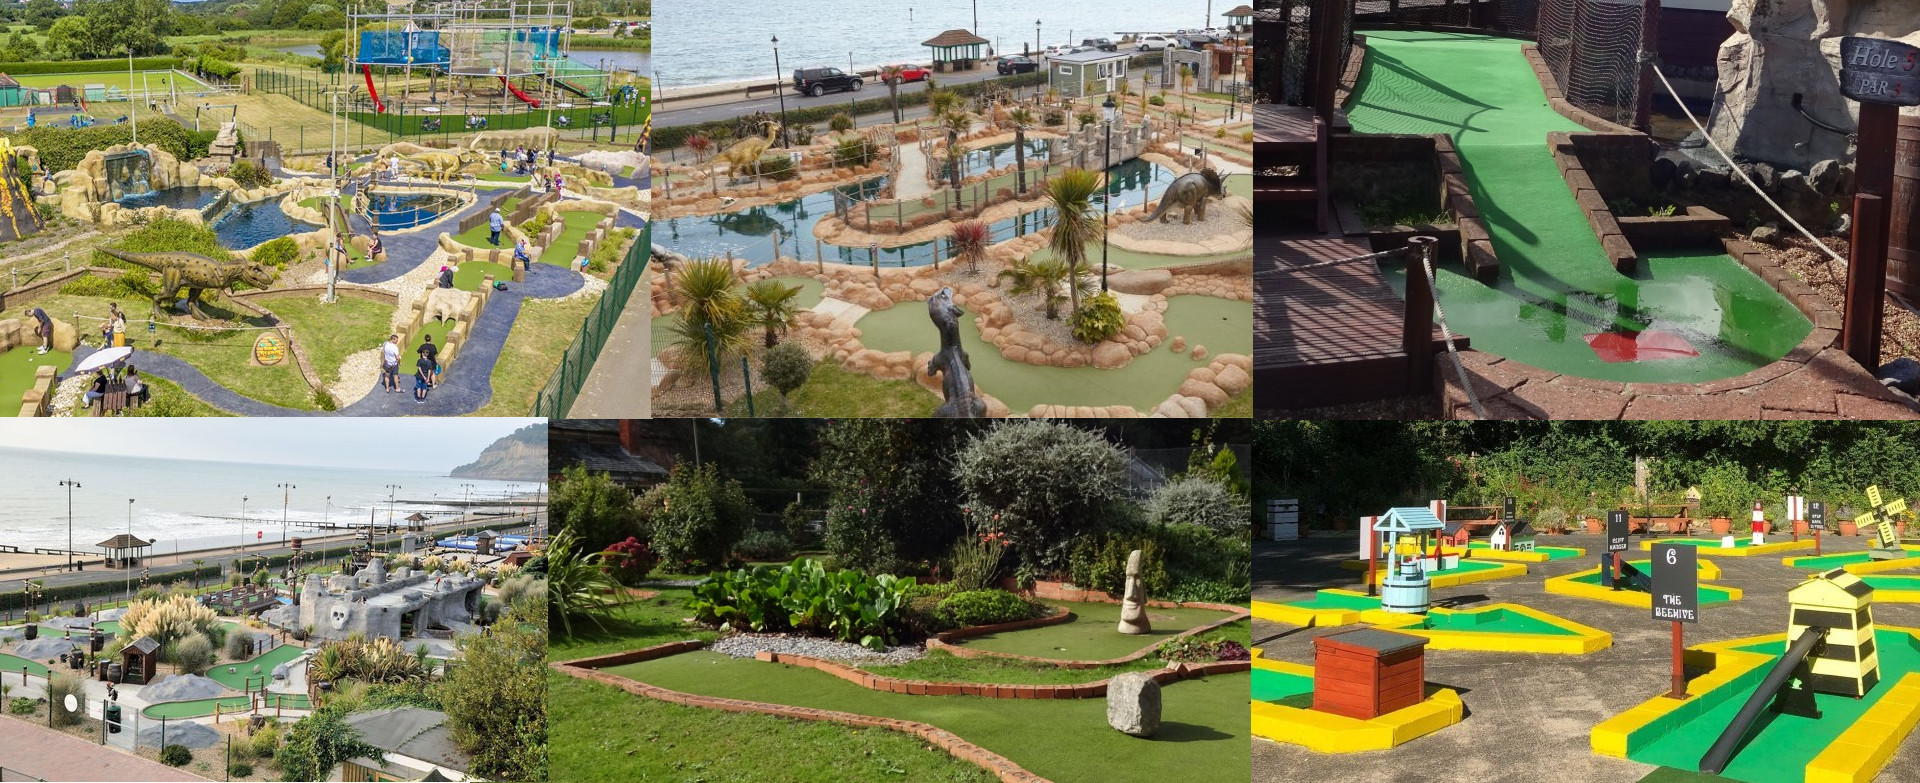 All 12 Crazy Golf Courses on the Isle of Wight